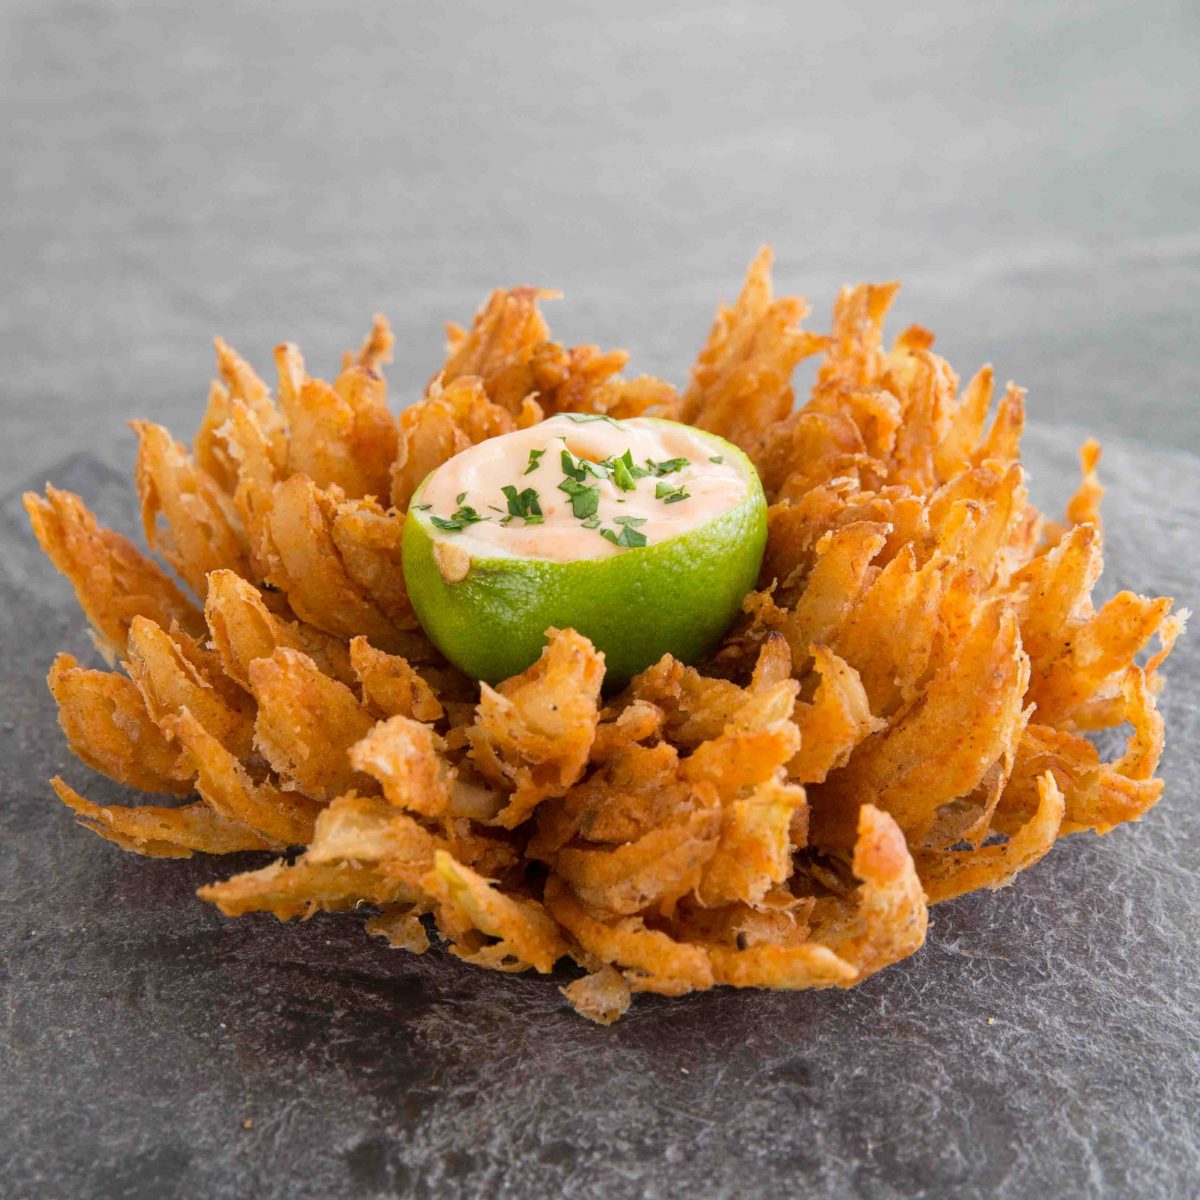 https://www.dontgobaconmyheart.co.uk/wp-content/uploads/2018/03/how-to-make-a-blooming-onion-11-e1621534193916.jpg